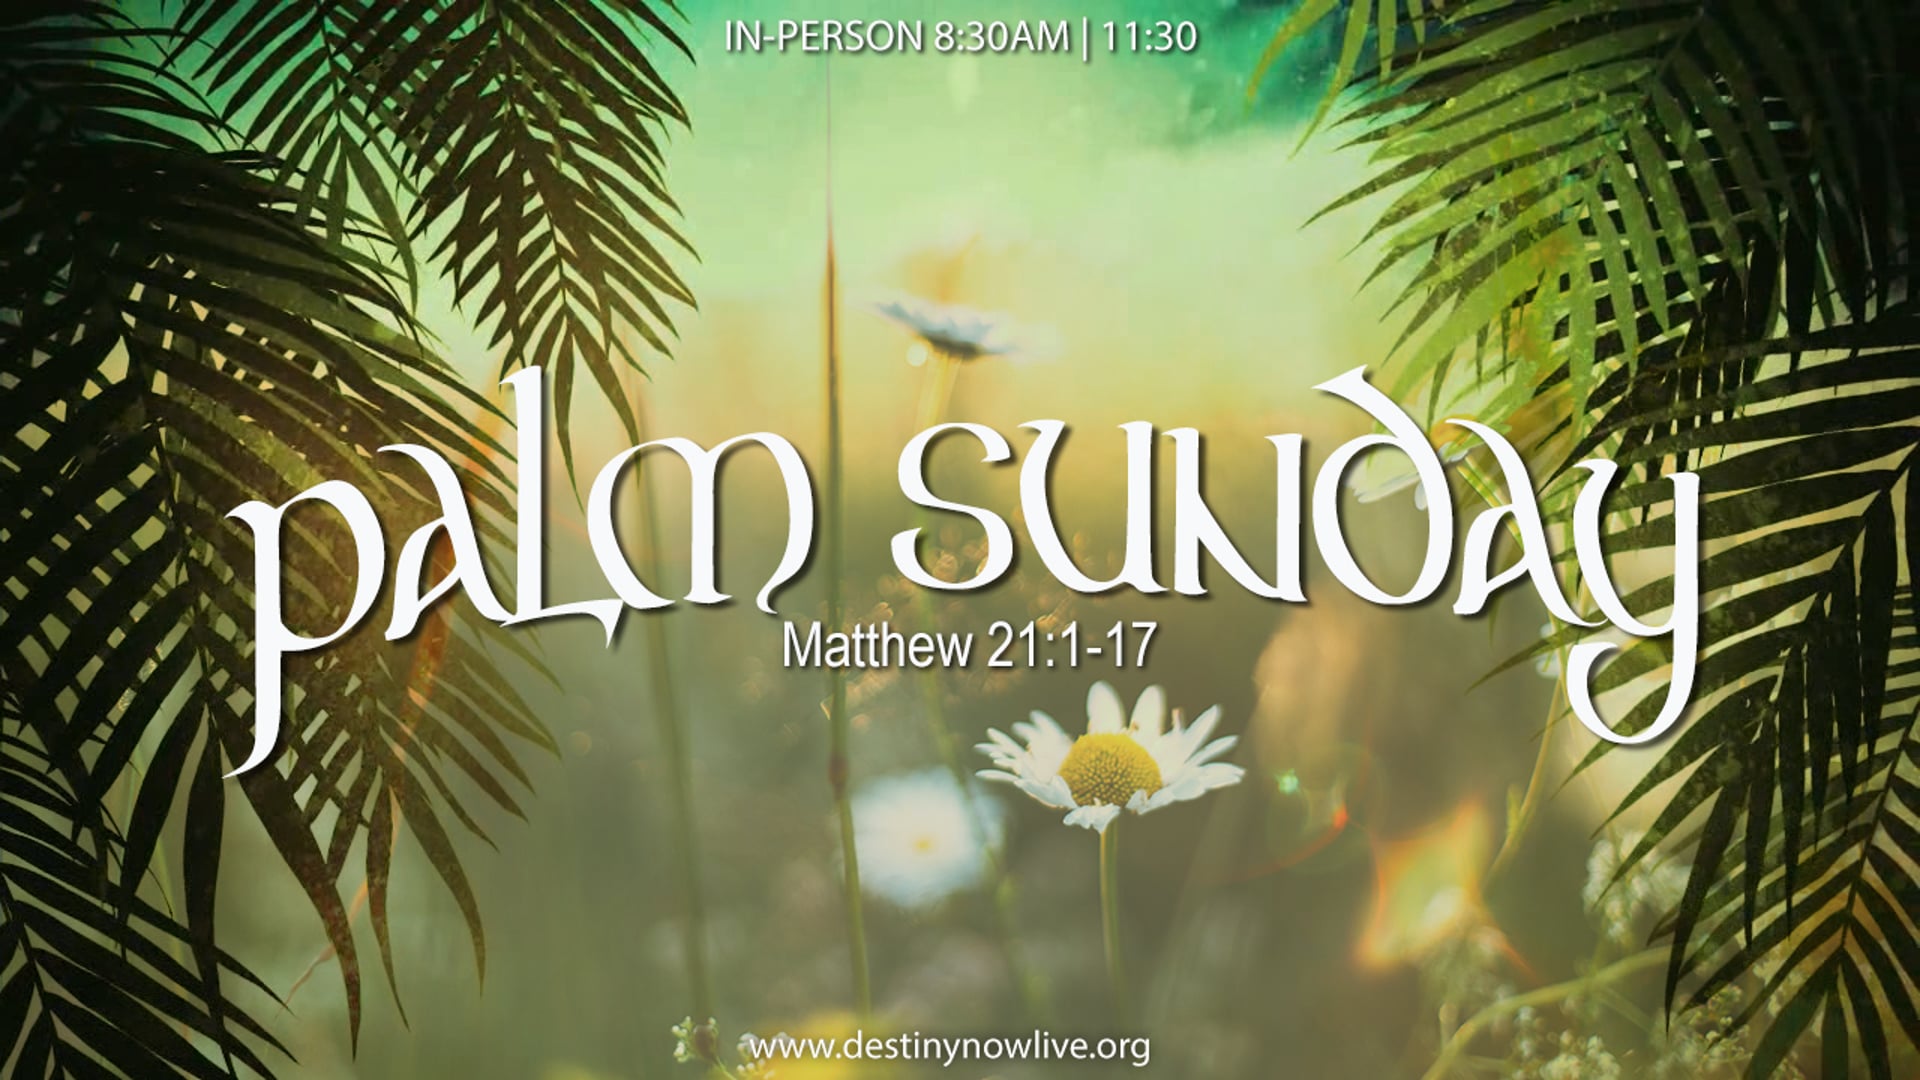 "Palm Sunday" - Text to Give - 910-460-3377 - Give Online @ www.destinynow.org